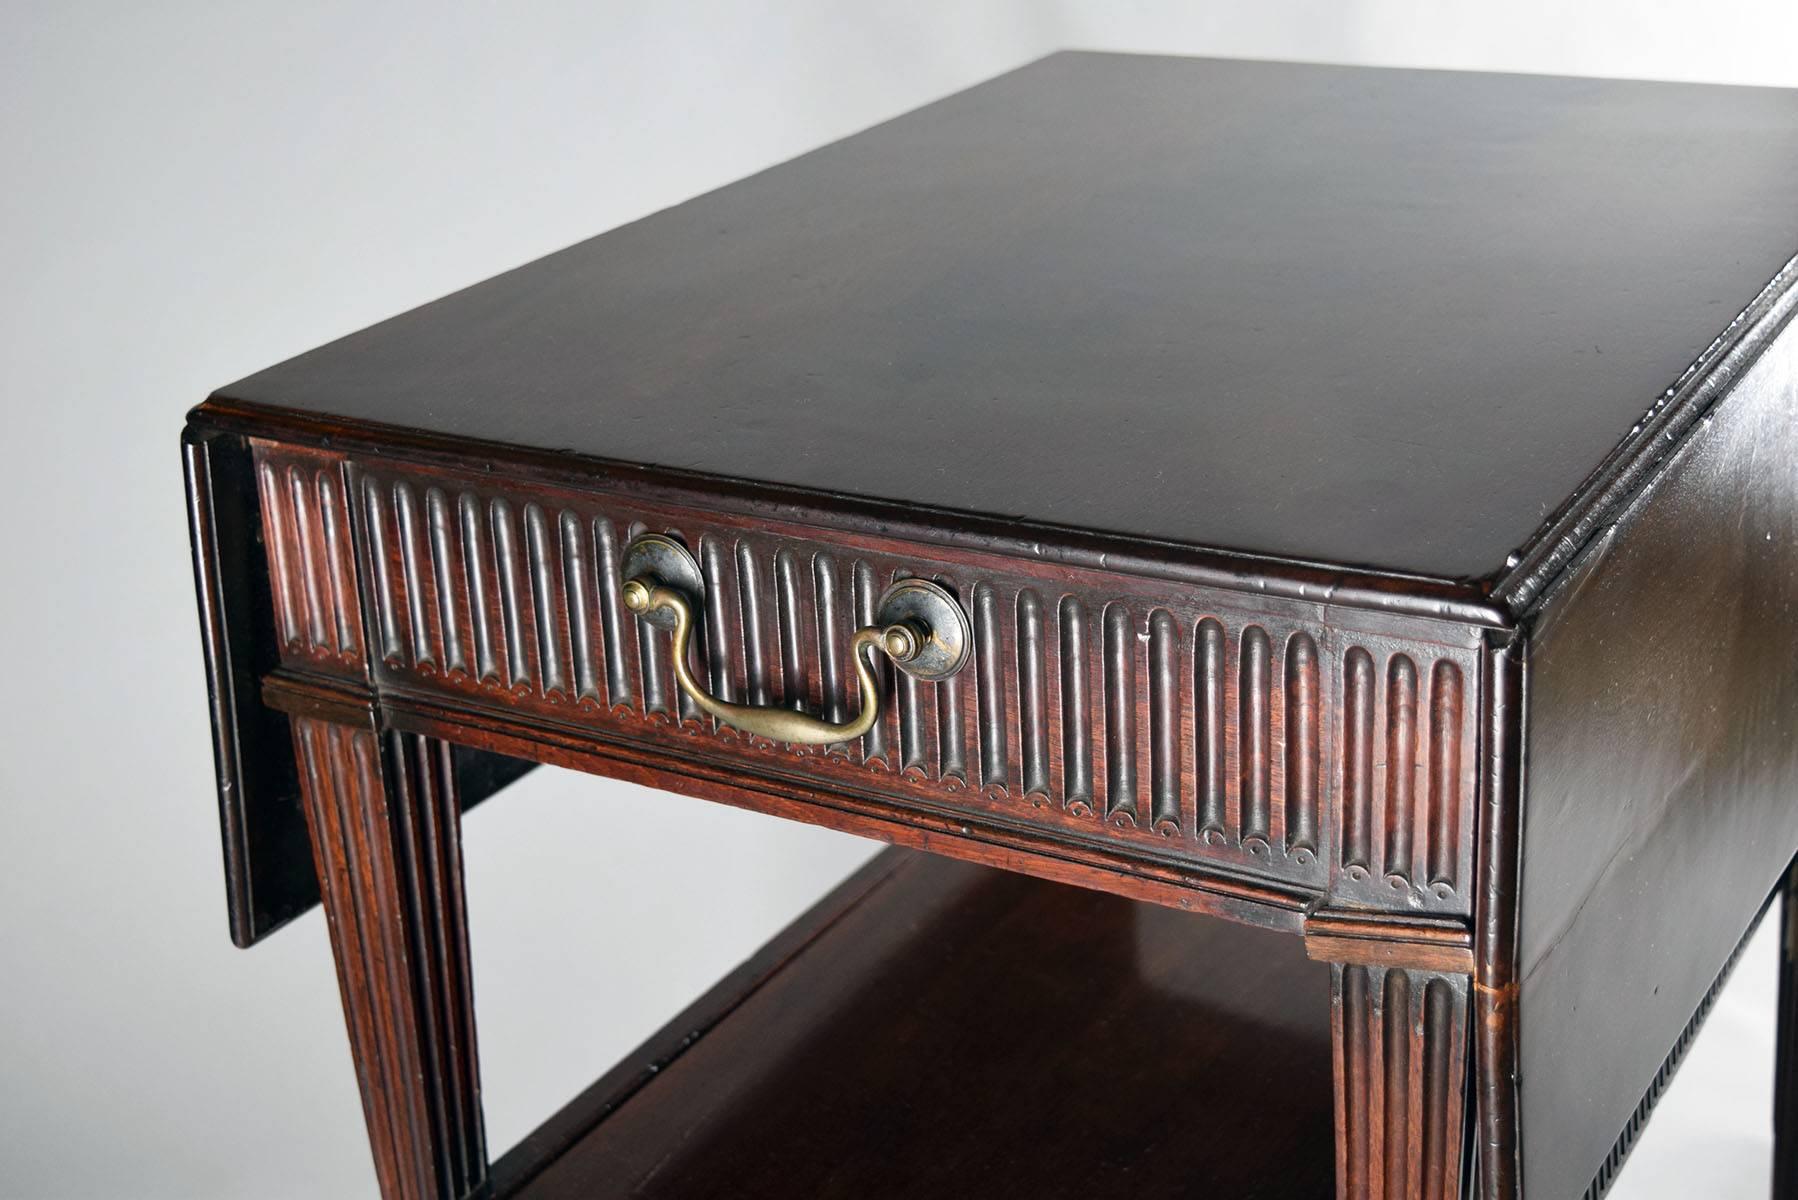 Rectangular top with two drop leaves over a fluted single drawer with retractable felt lined writing surface, raised on squared tapering fluted legs joined by a stretcher shelf, the legs ending in block feet and casters.

Provenance: Roundwood